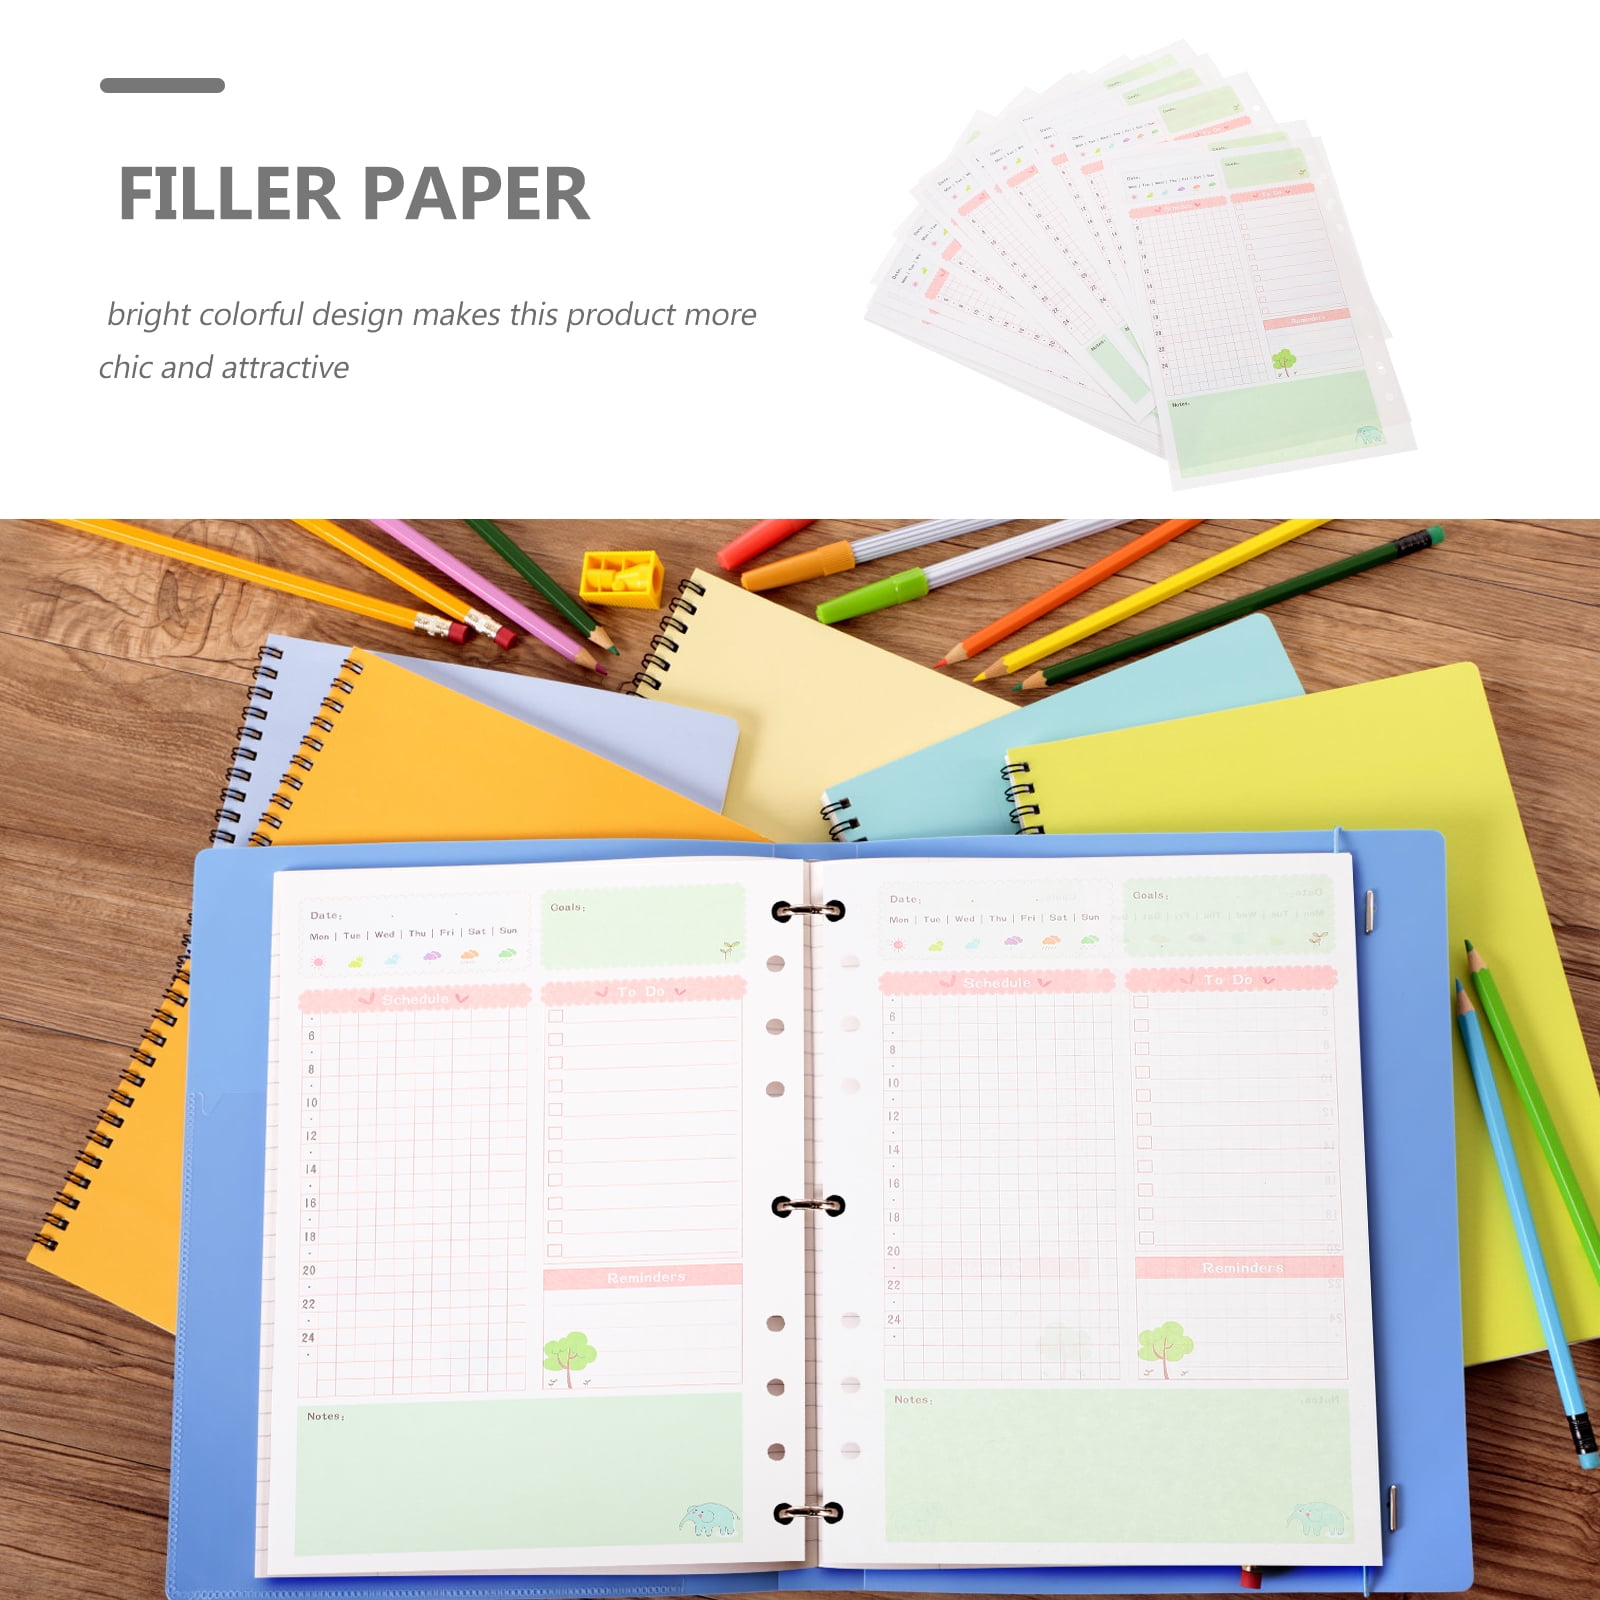  CityGirl Planners A5 Notes Planner Insert Refill, Fits